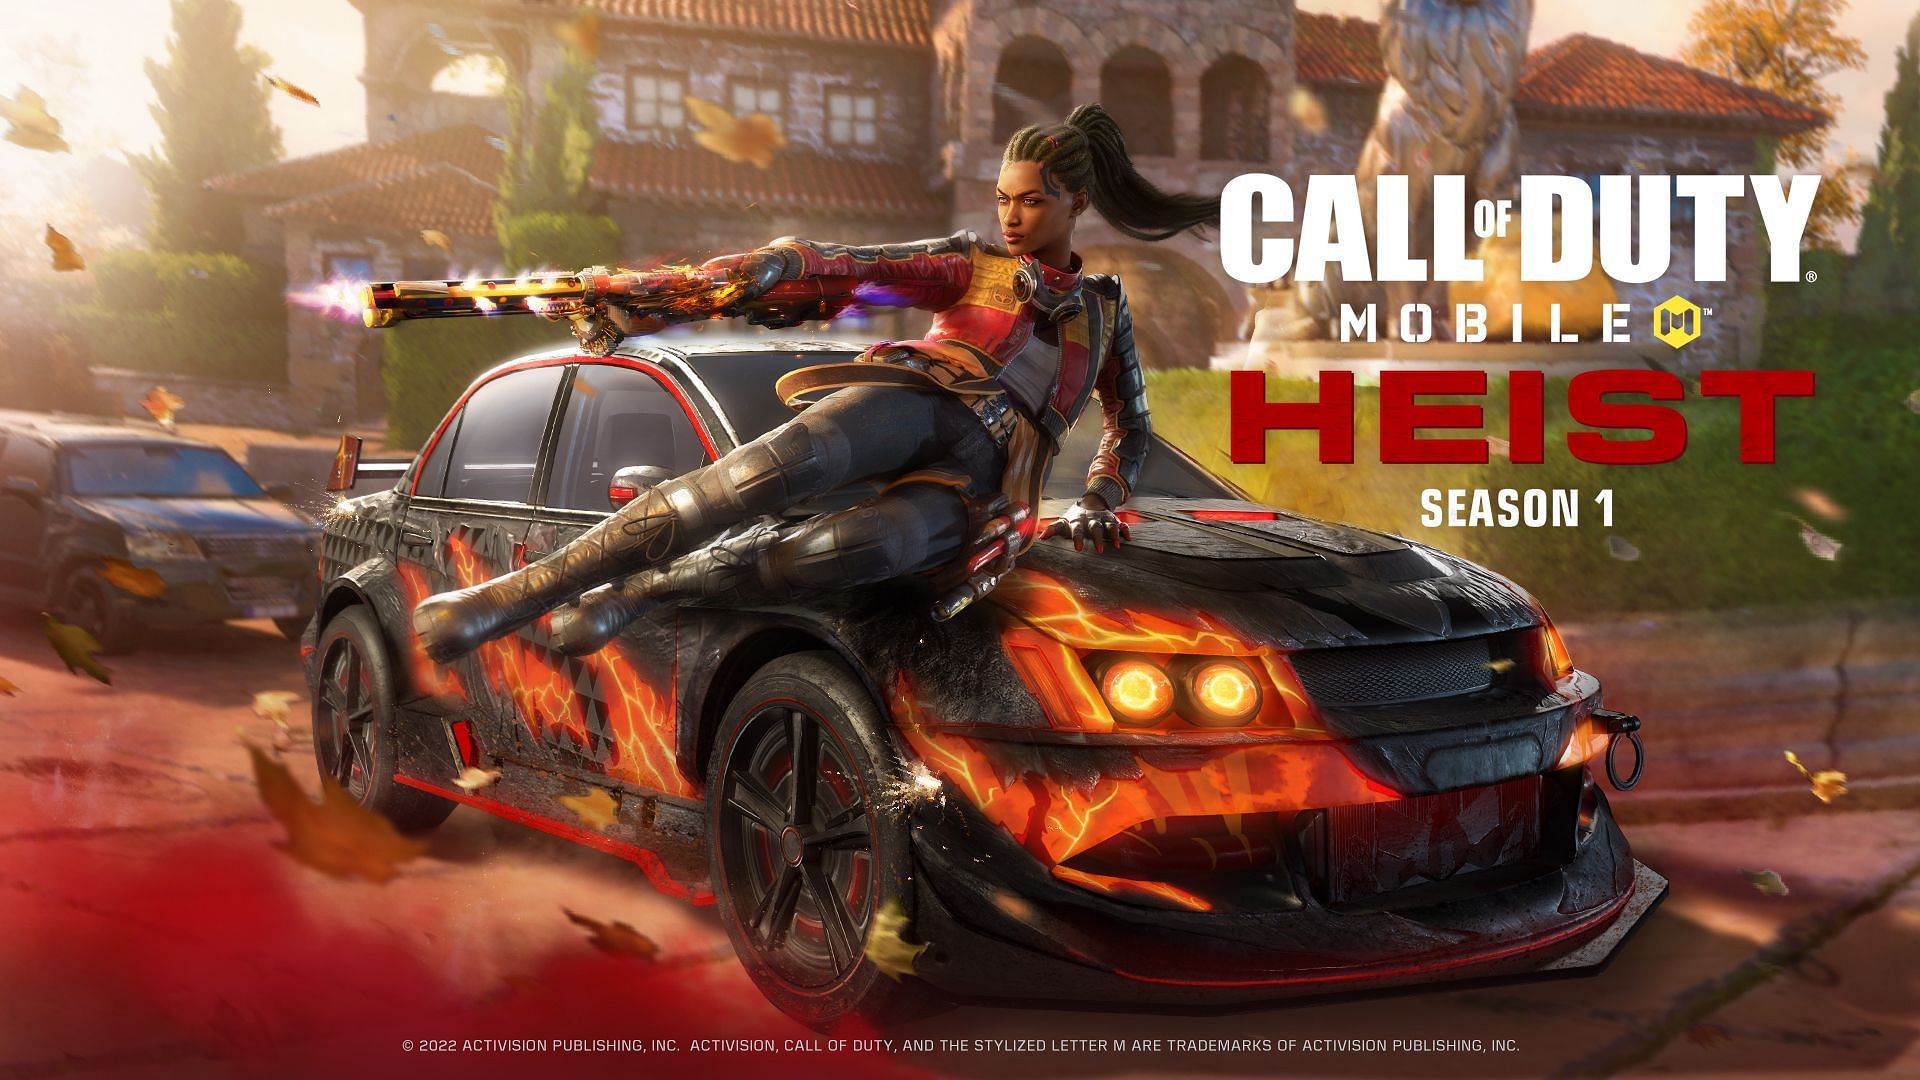 COD Mobile Season 1 of 2022 is live and players can purchase the premium Battle Pass to unlock a ton of exclusive content (Image via Activision)